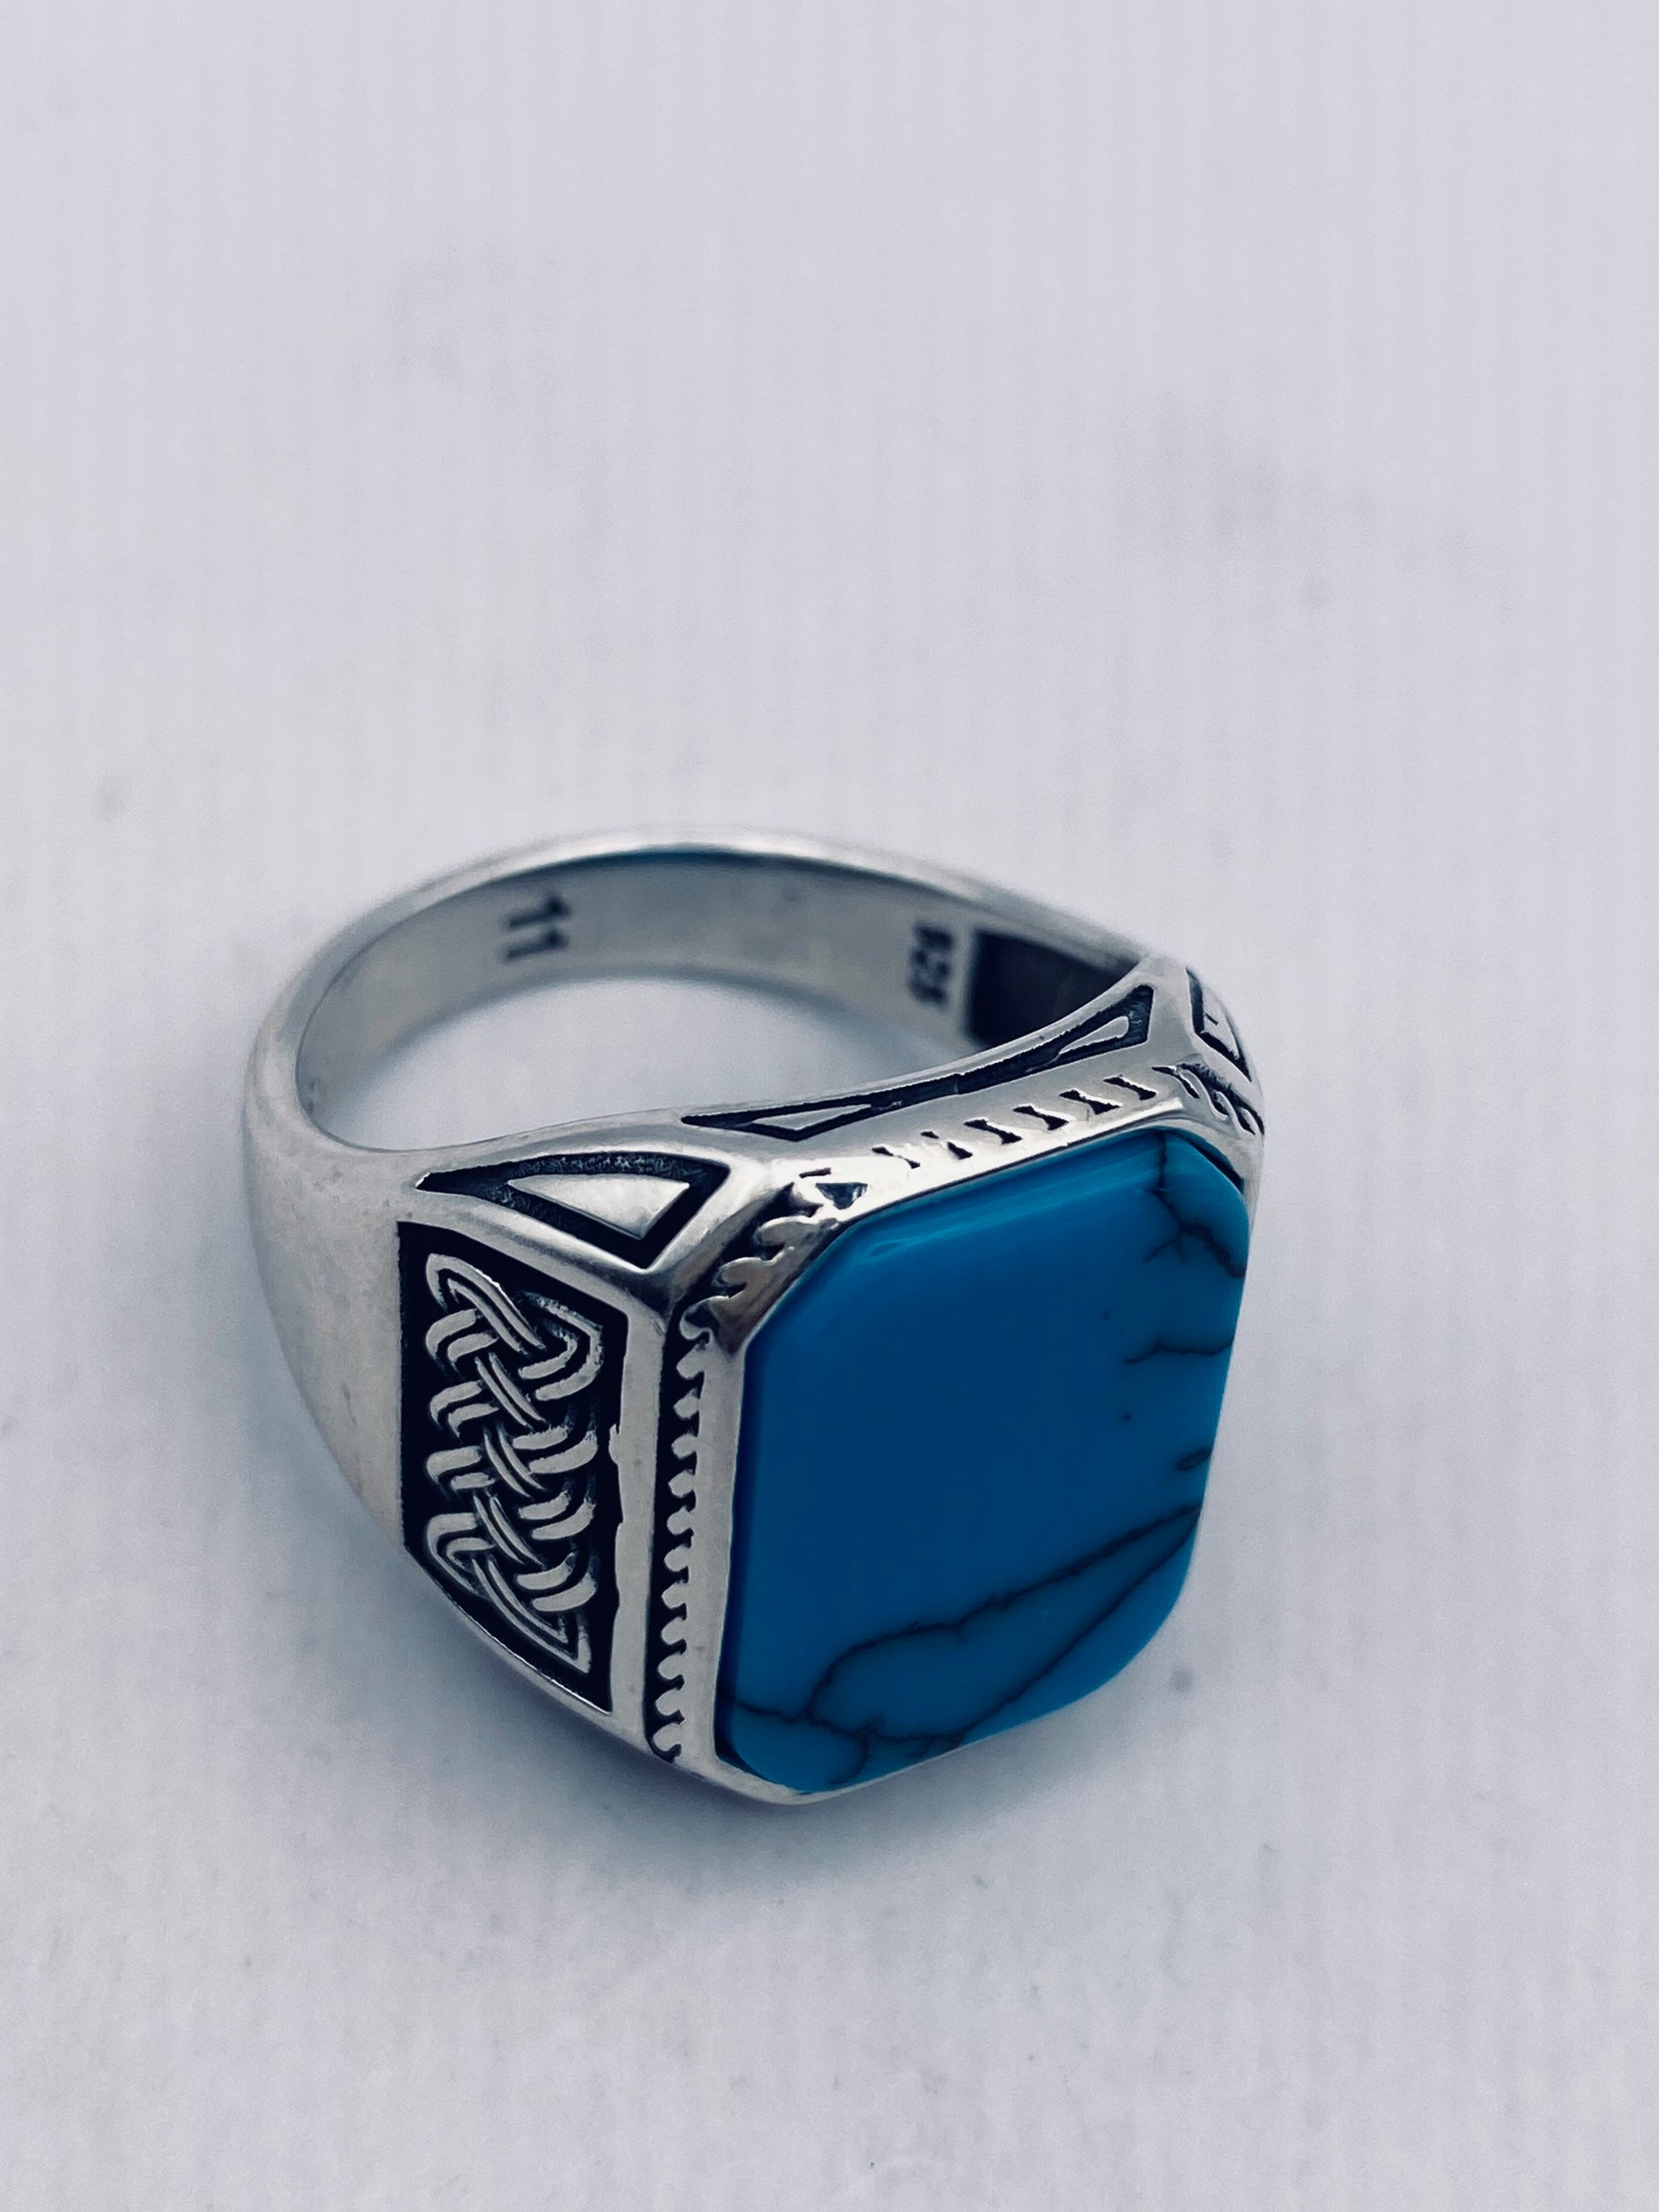 Vintage Turquoise Mens Ring in 925 Sterling Silver